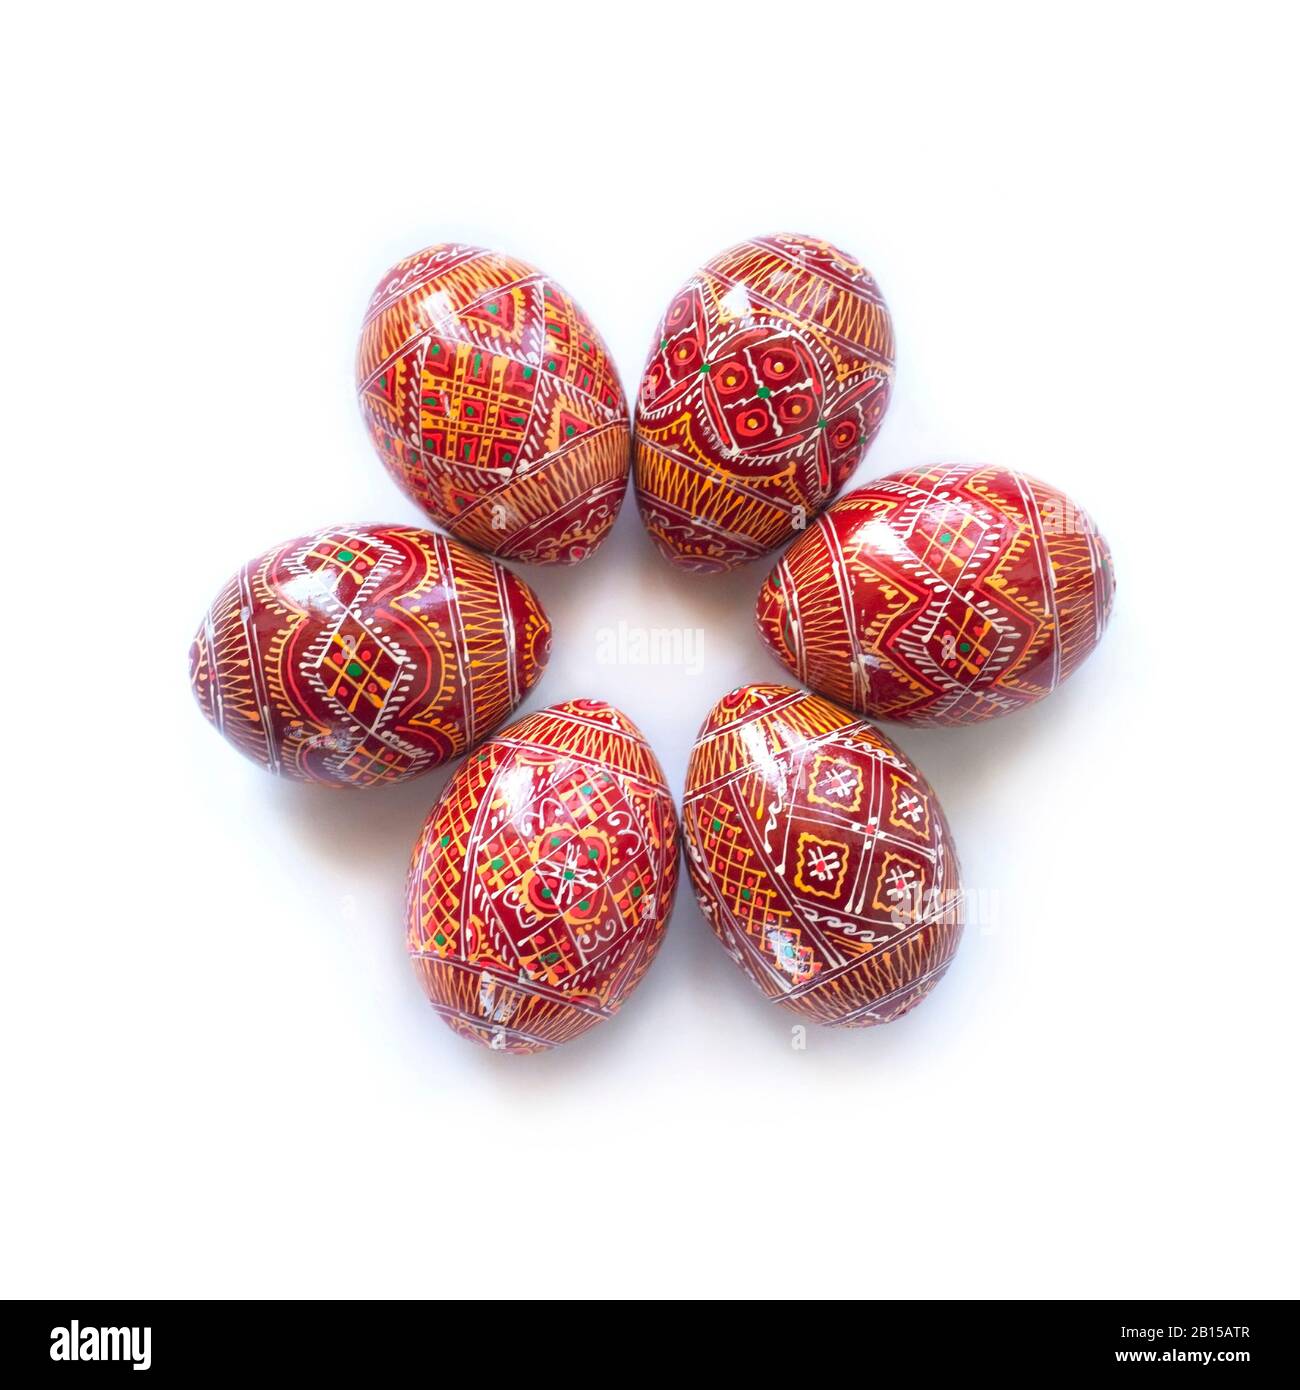 Pysanky - Ukrainian traditional painted Easter eggs isolated on white background Stock Photo